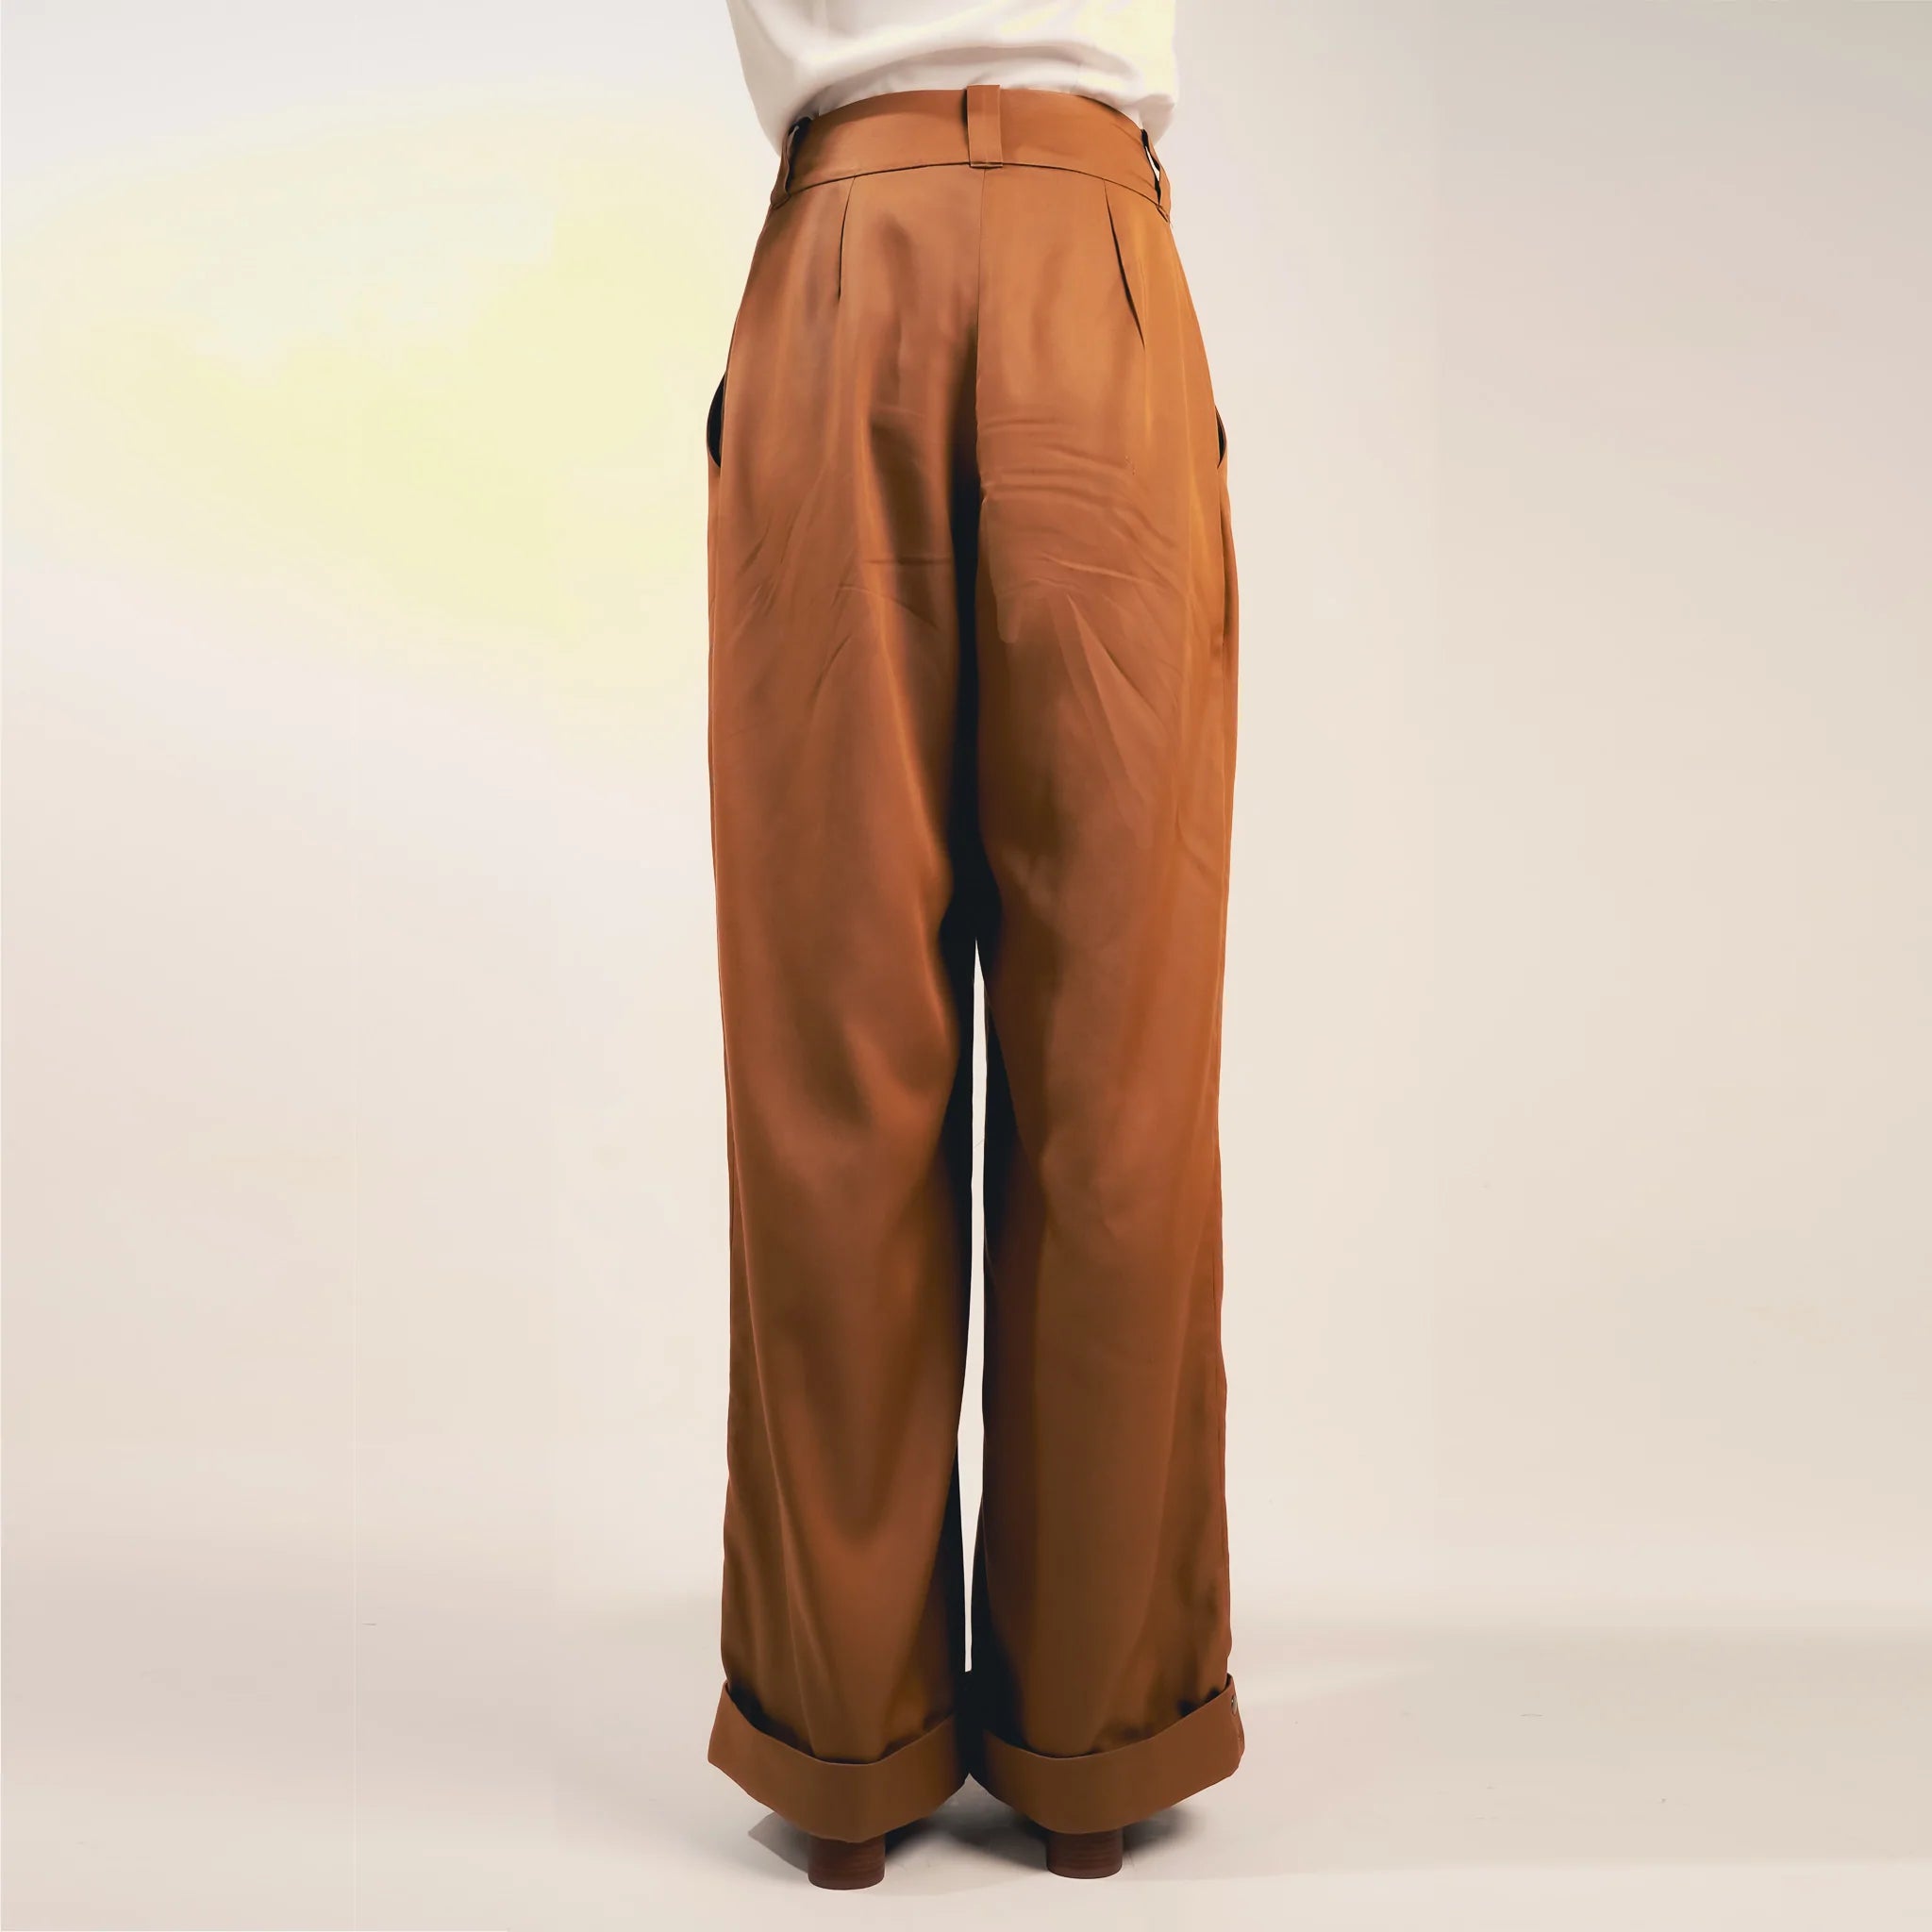 Camel Trouser Back VIew